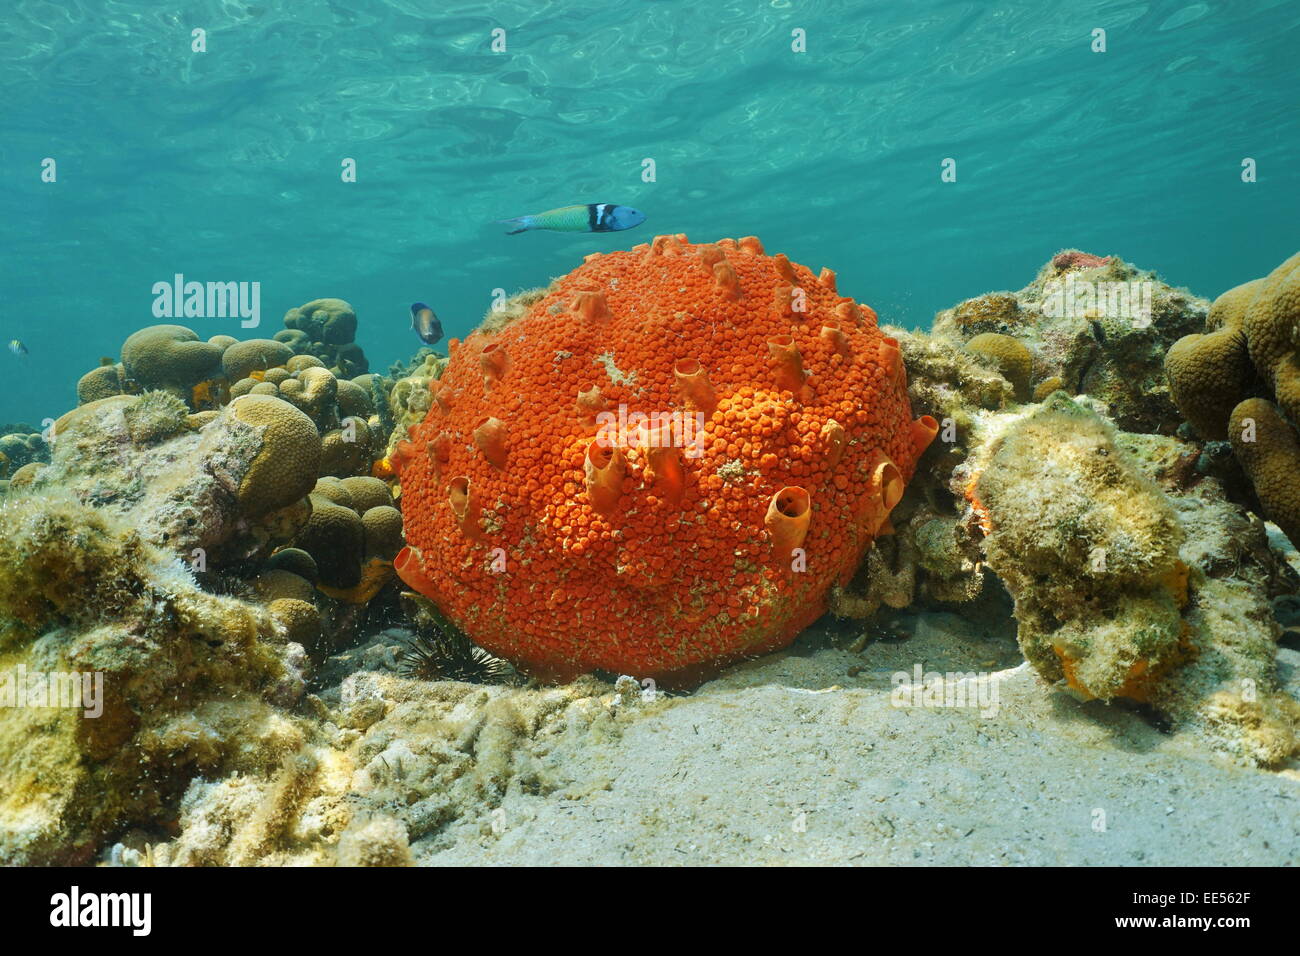 Underwater life, red encrusting sponge, Cliona delitrix, on shallow seabed of the Caribbean sea Stock Photo